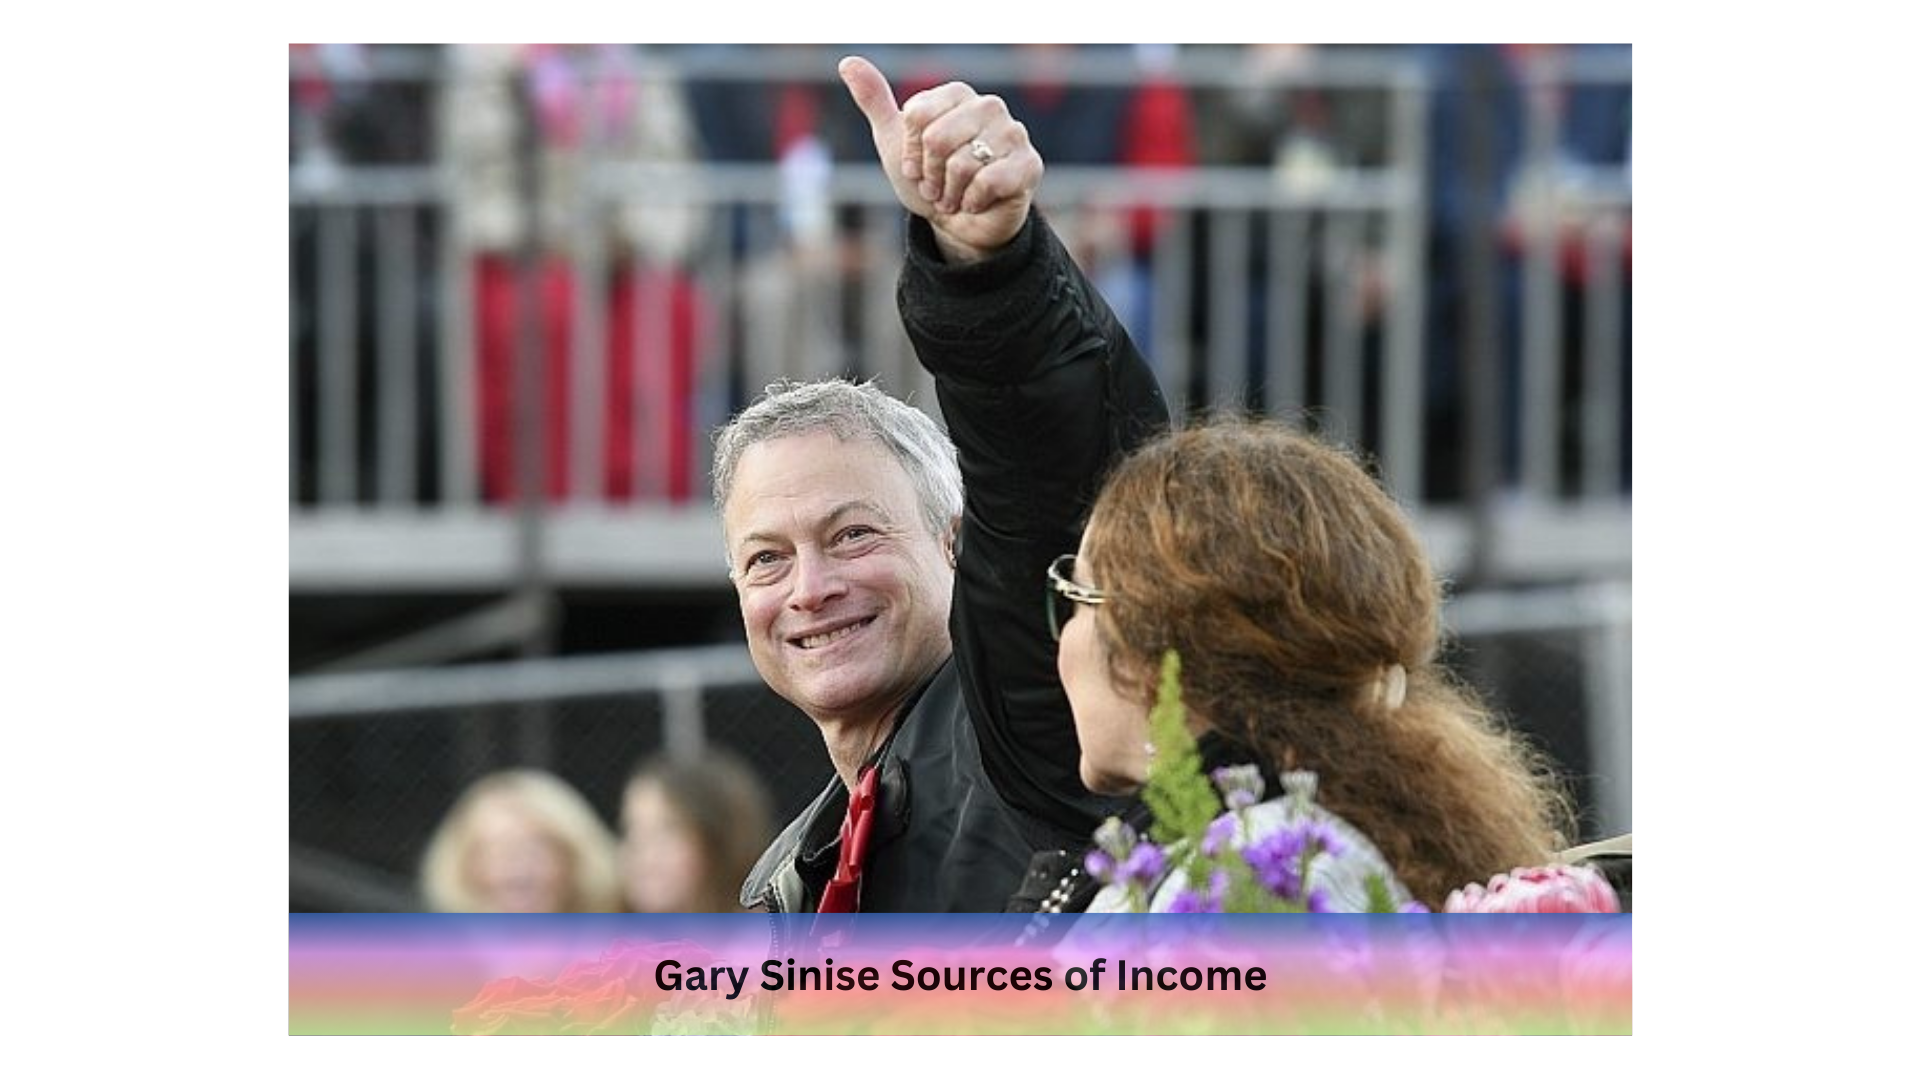 Gary Sinise Sources of Income